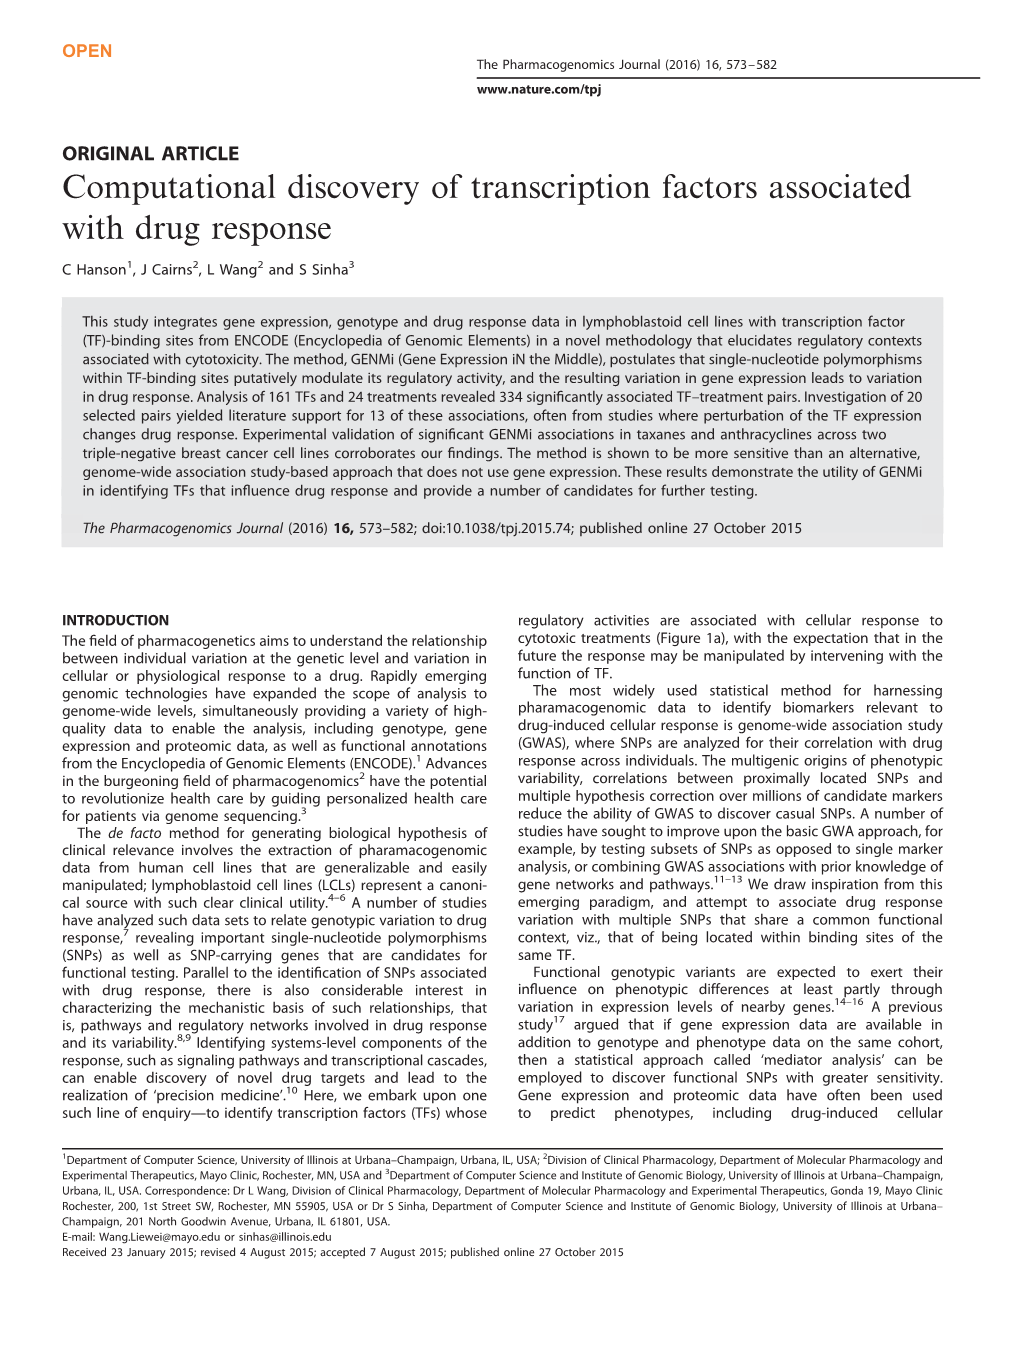 Computational Discovery of Transcription Factors Associated with Drug Response